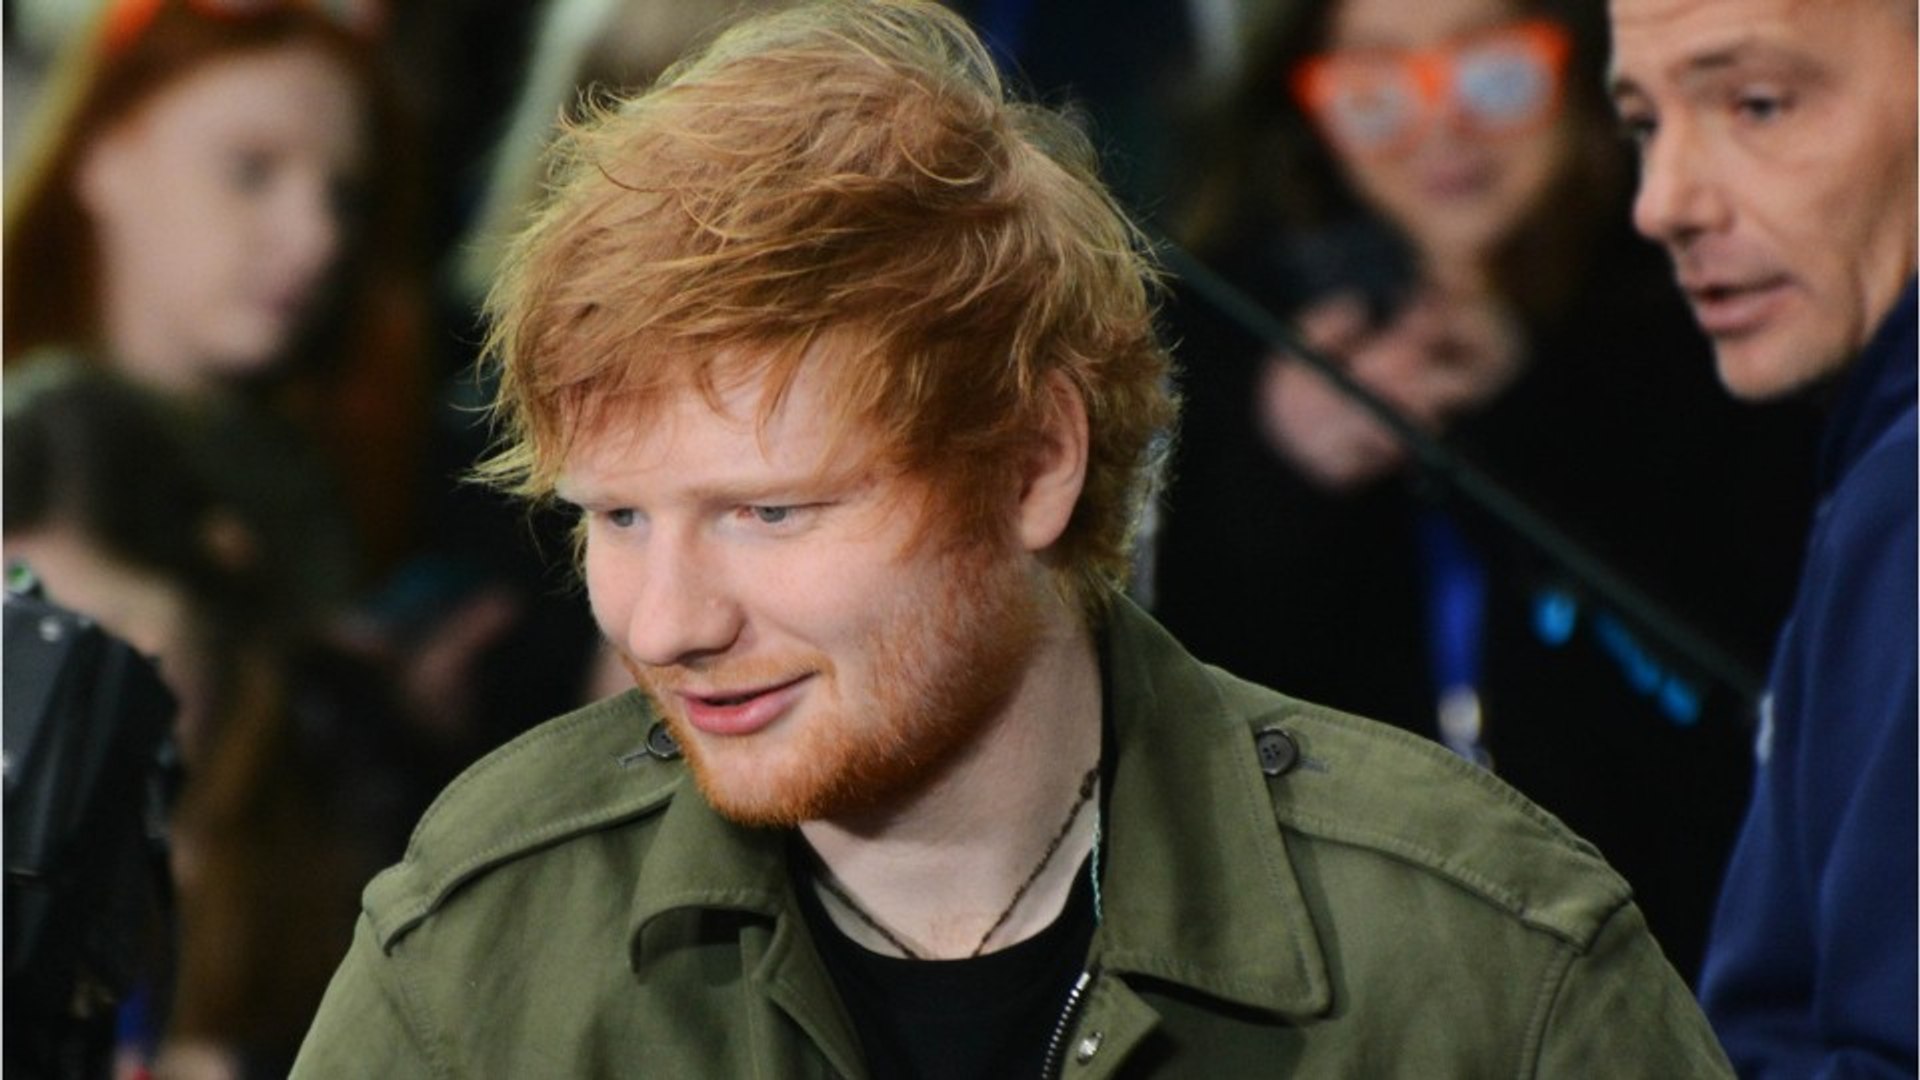 Ed Sheeran To Guest-Star On “Game Of Thrones”